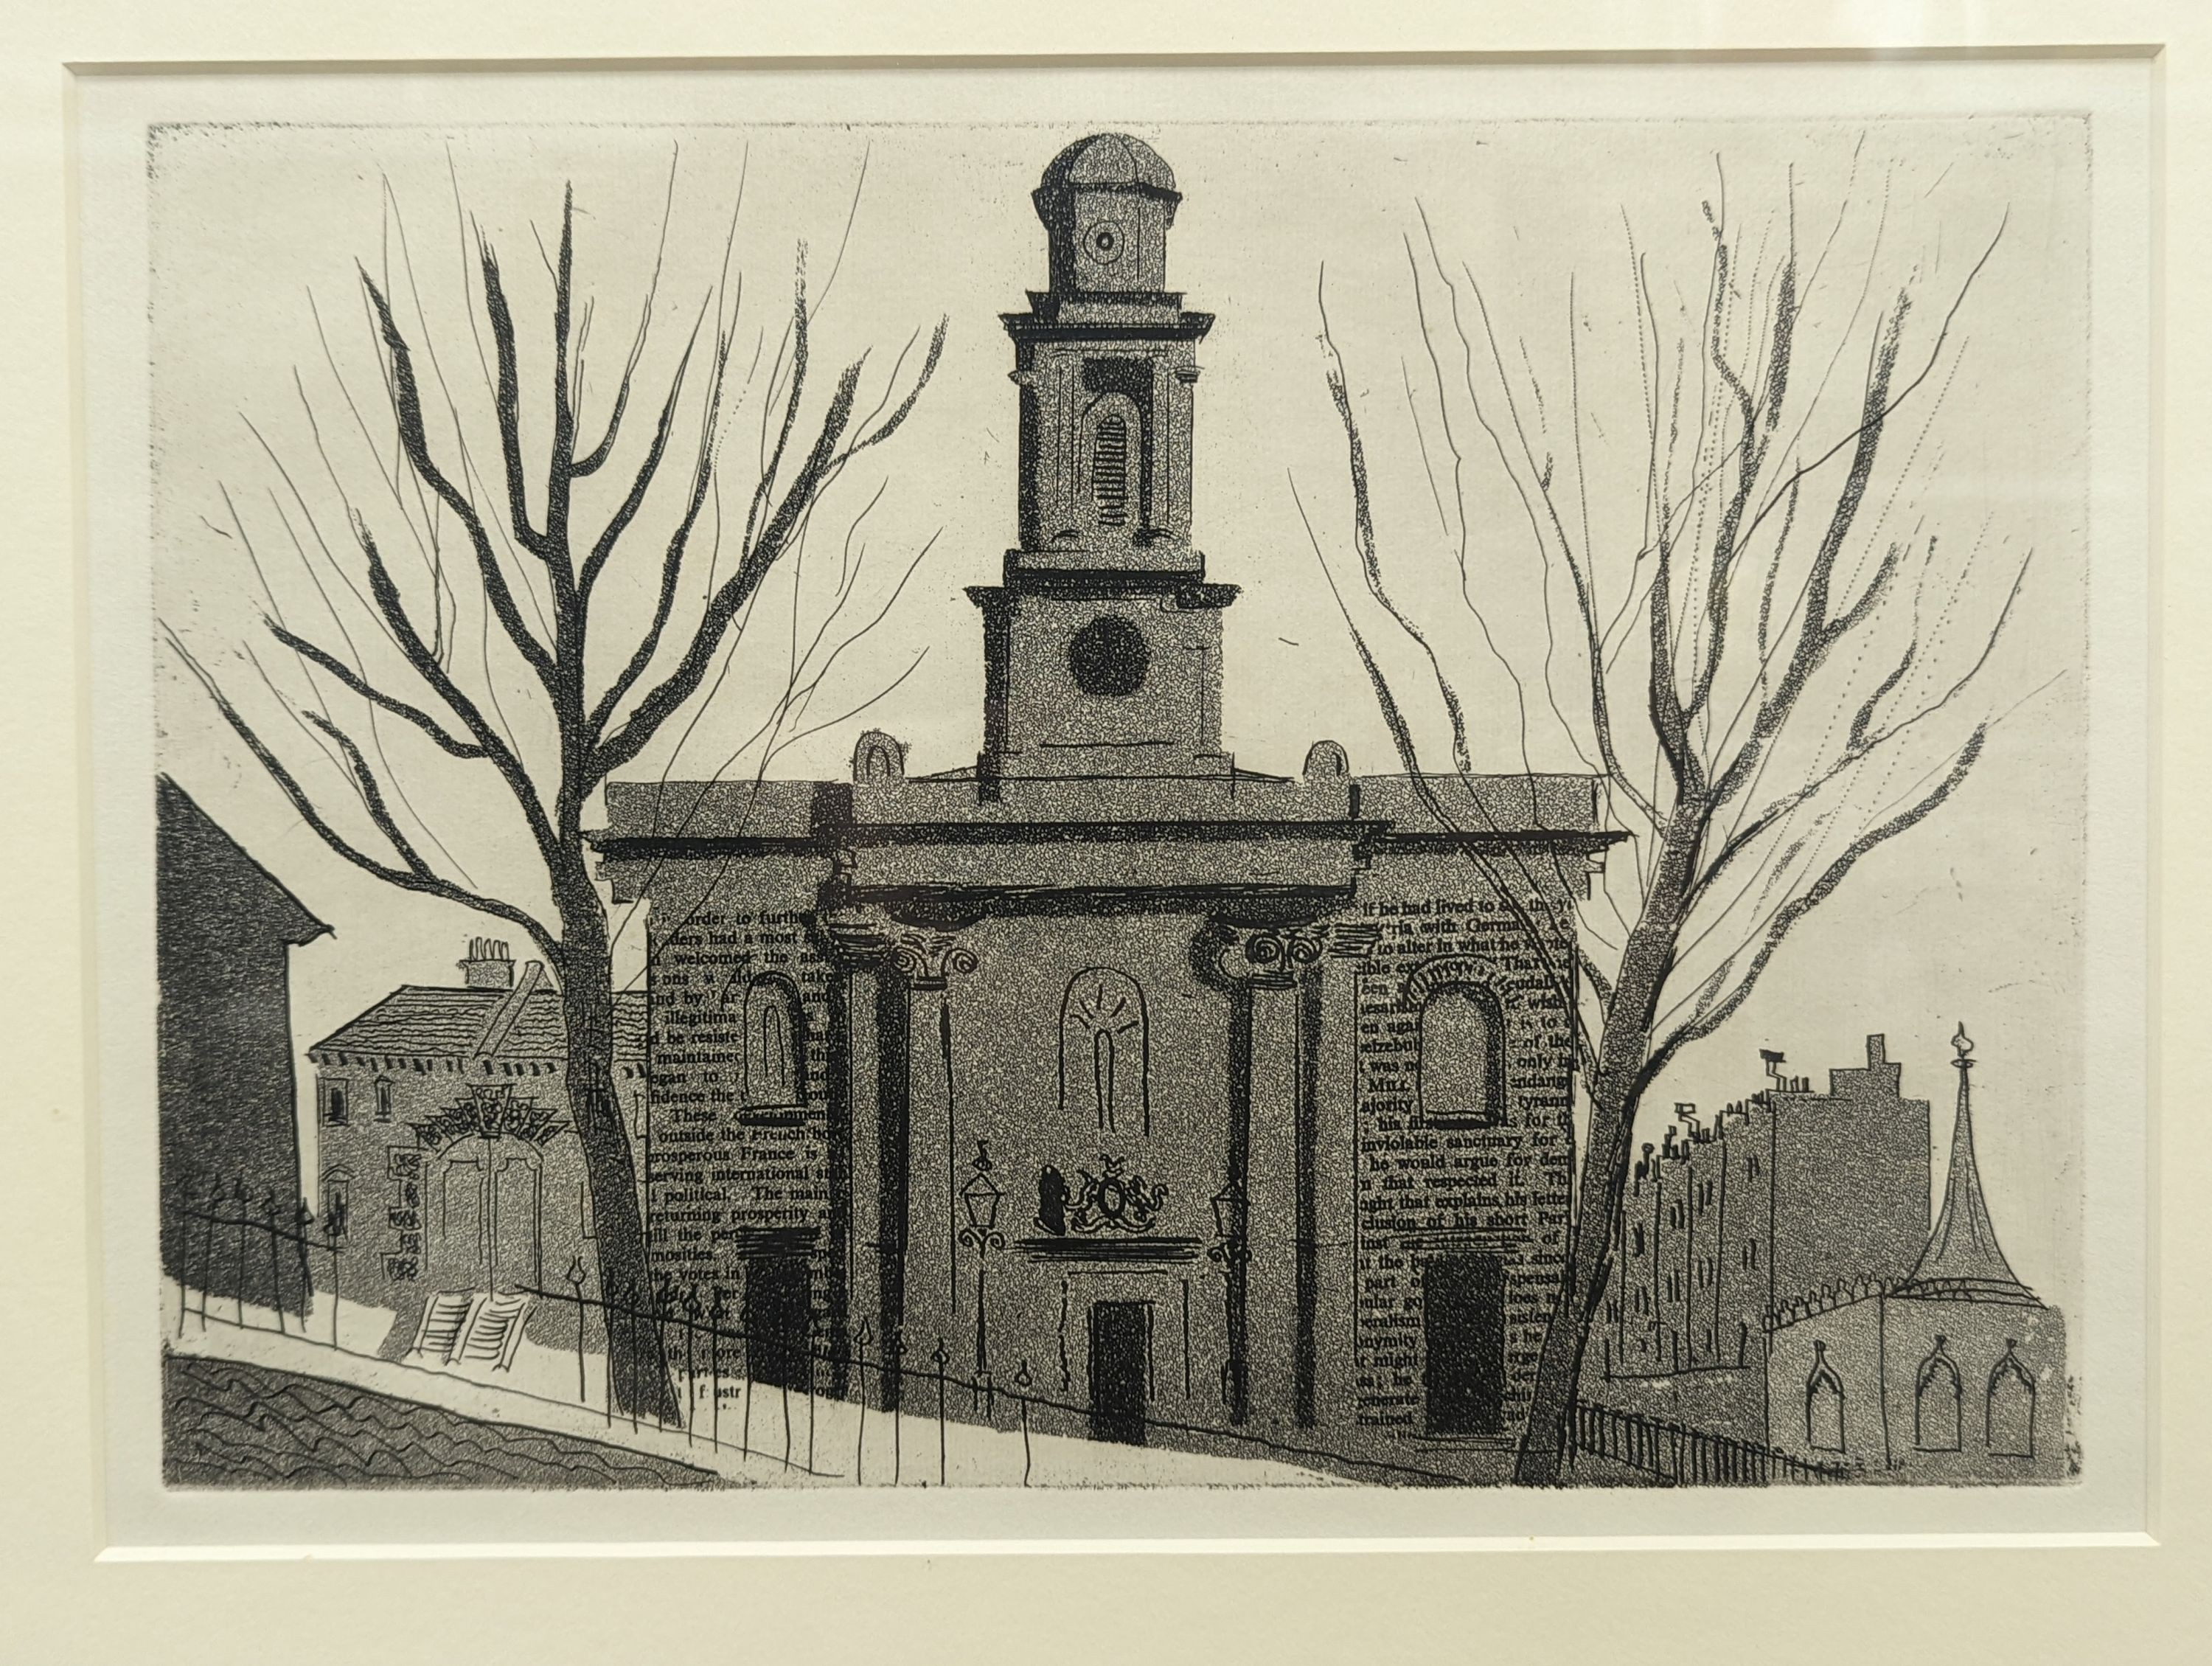 John Piper (1903-1992), etching and aquatint, ‘The Chapel of St George, Kemptown’, from the Brighton Aquatints Series, edition of 255, Goldmark Gallery label verso, 20 x 27cm